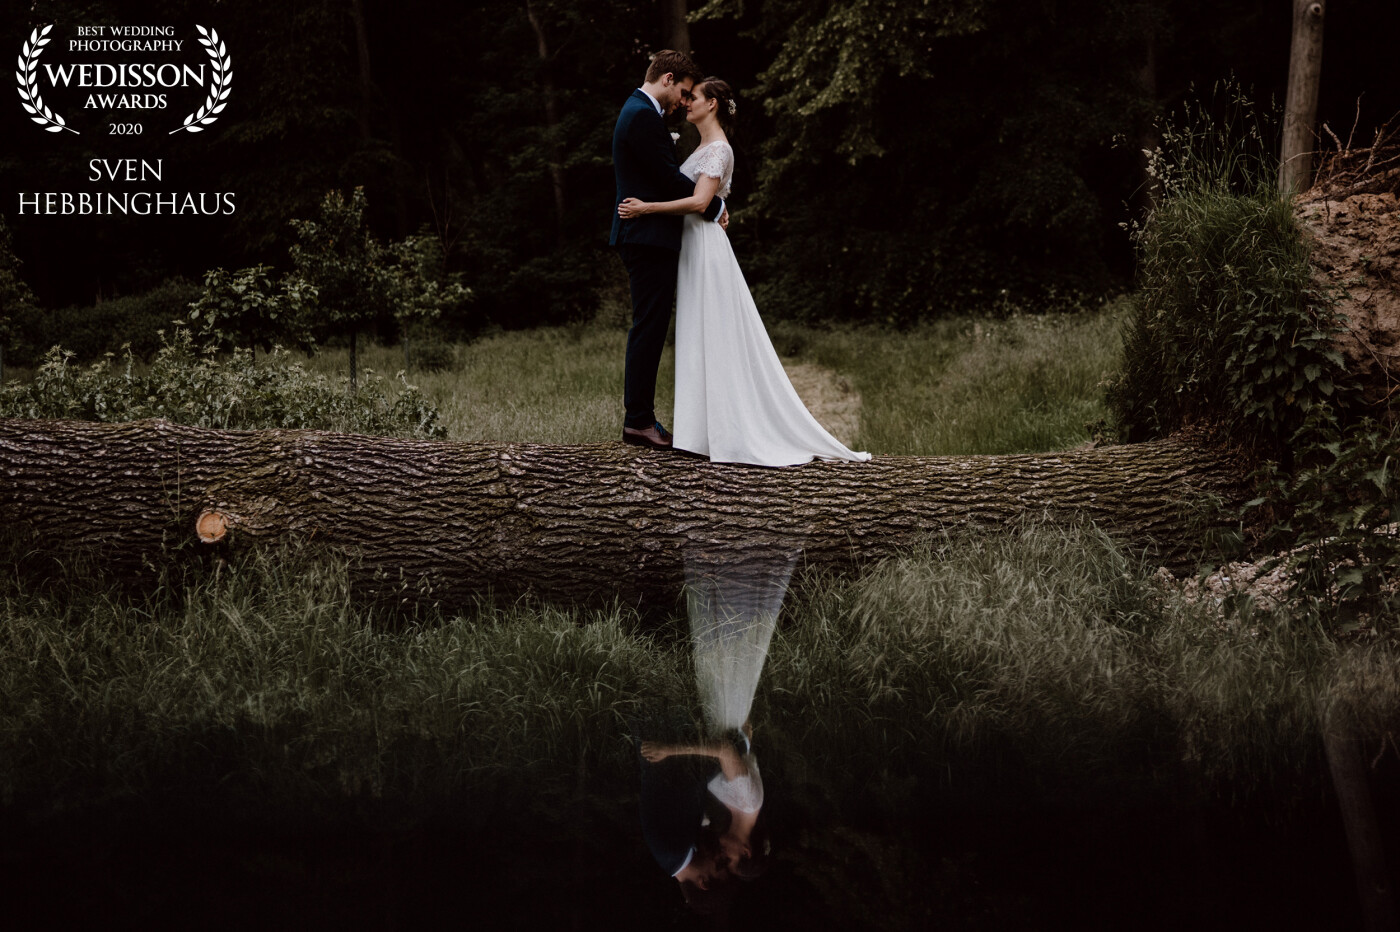 I think this moment just looks very intimate. I made the reflection directly during the shot. No photoshop afterward. I like these reflections because they give the picture more depth and expression!